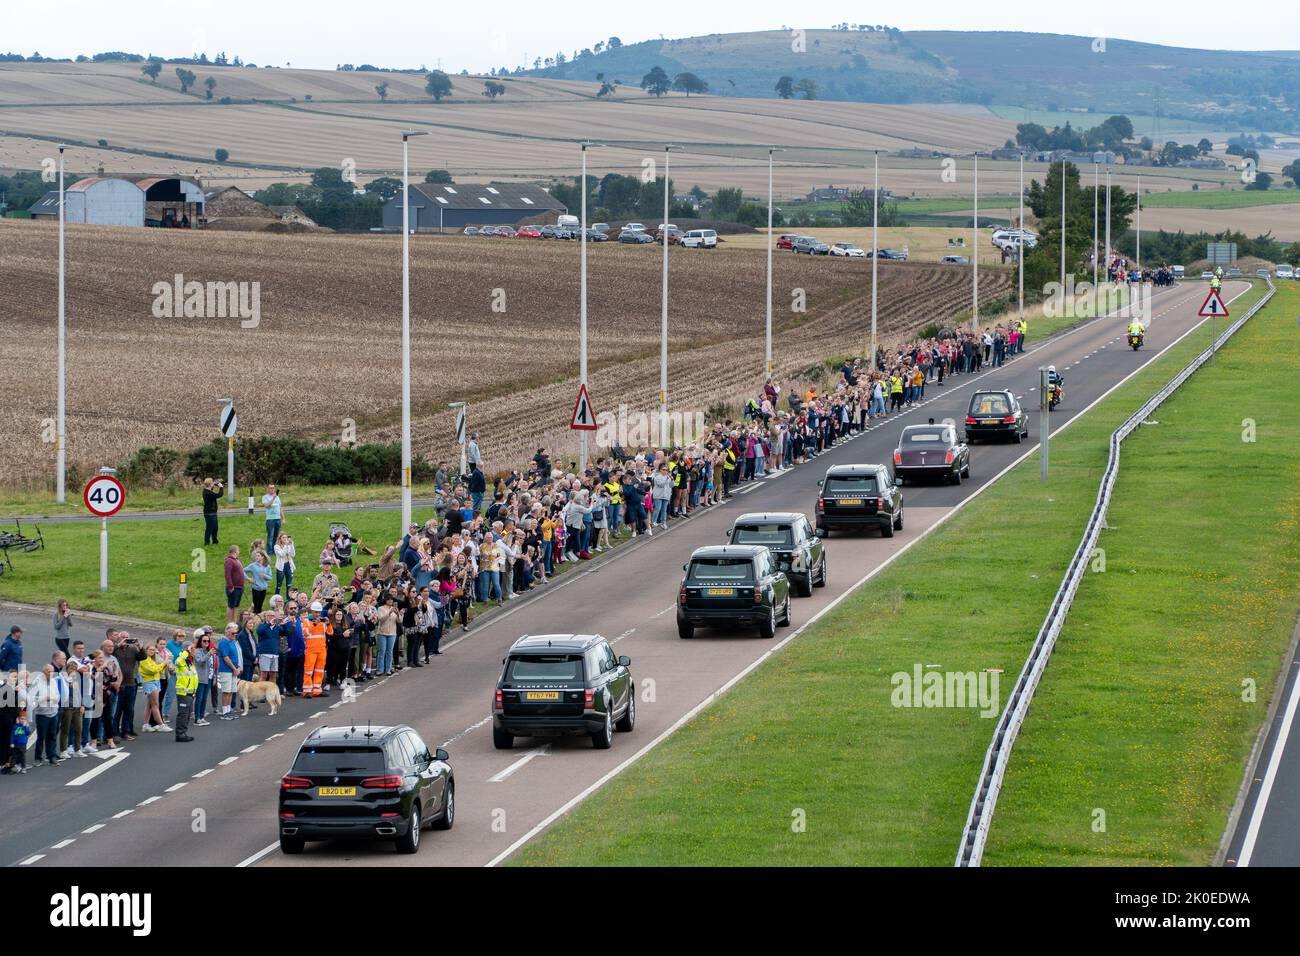 Forfar, Scotland, UK. 11th September, 2022. Queen Elizabeth II travels along the A90, Forfar, on route to Edinburgh, as large crowds gather to show their respect - 11th of September 2022, Angus, Forfar, Scotland, United Kingdom - Credit: Barry Nixon/ Alamy LIve News Stock Photo